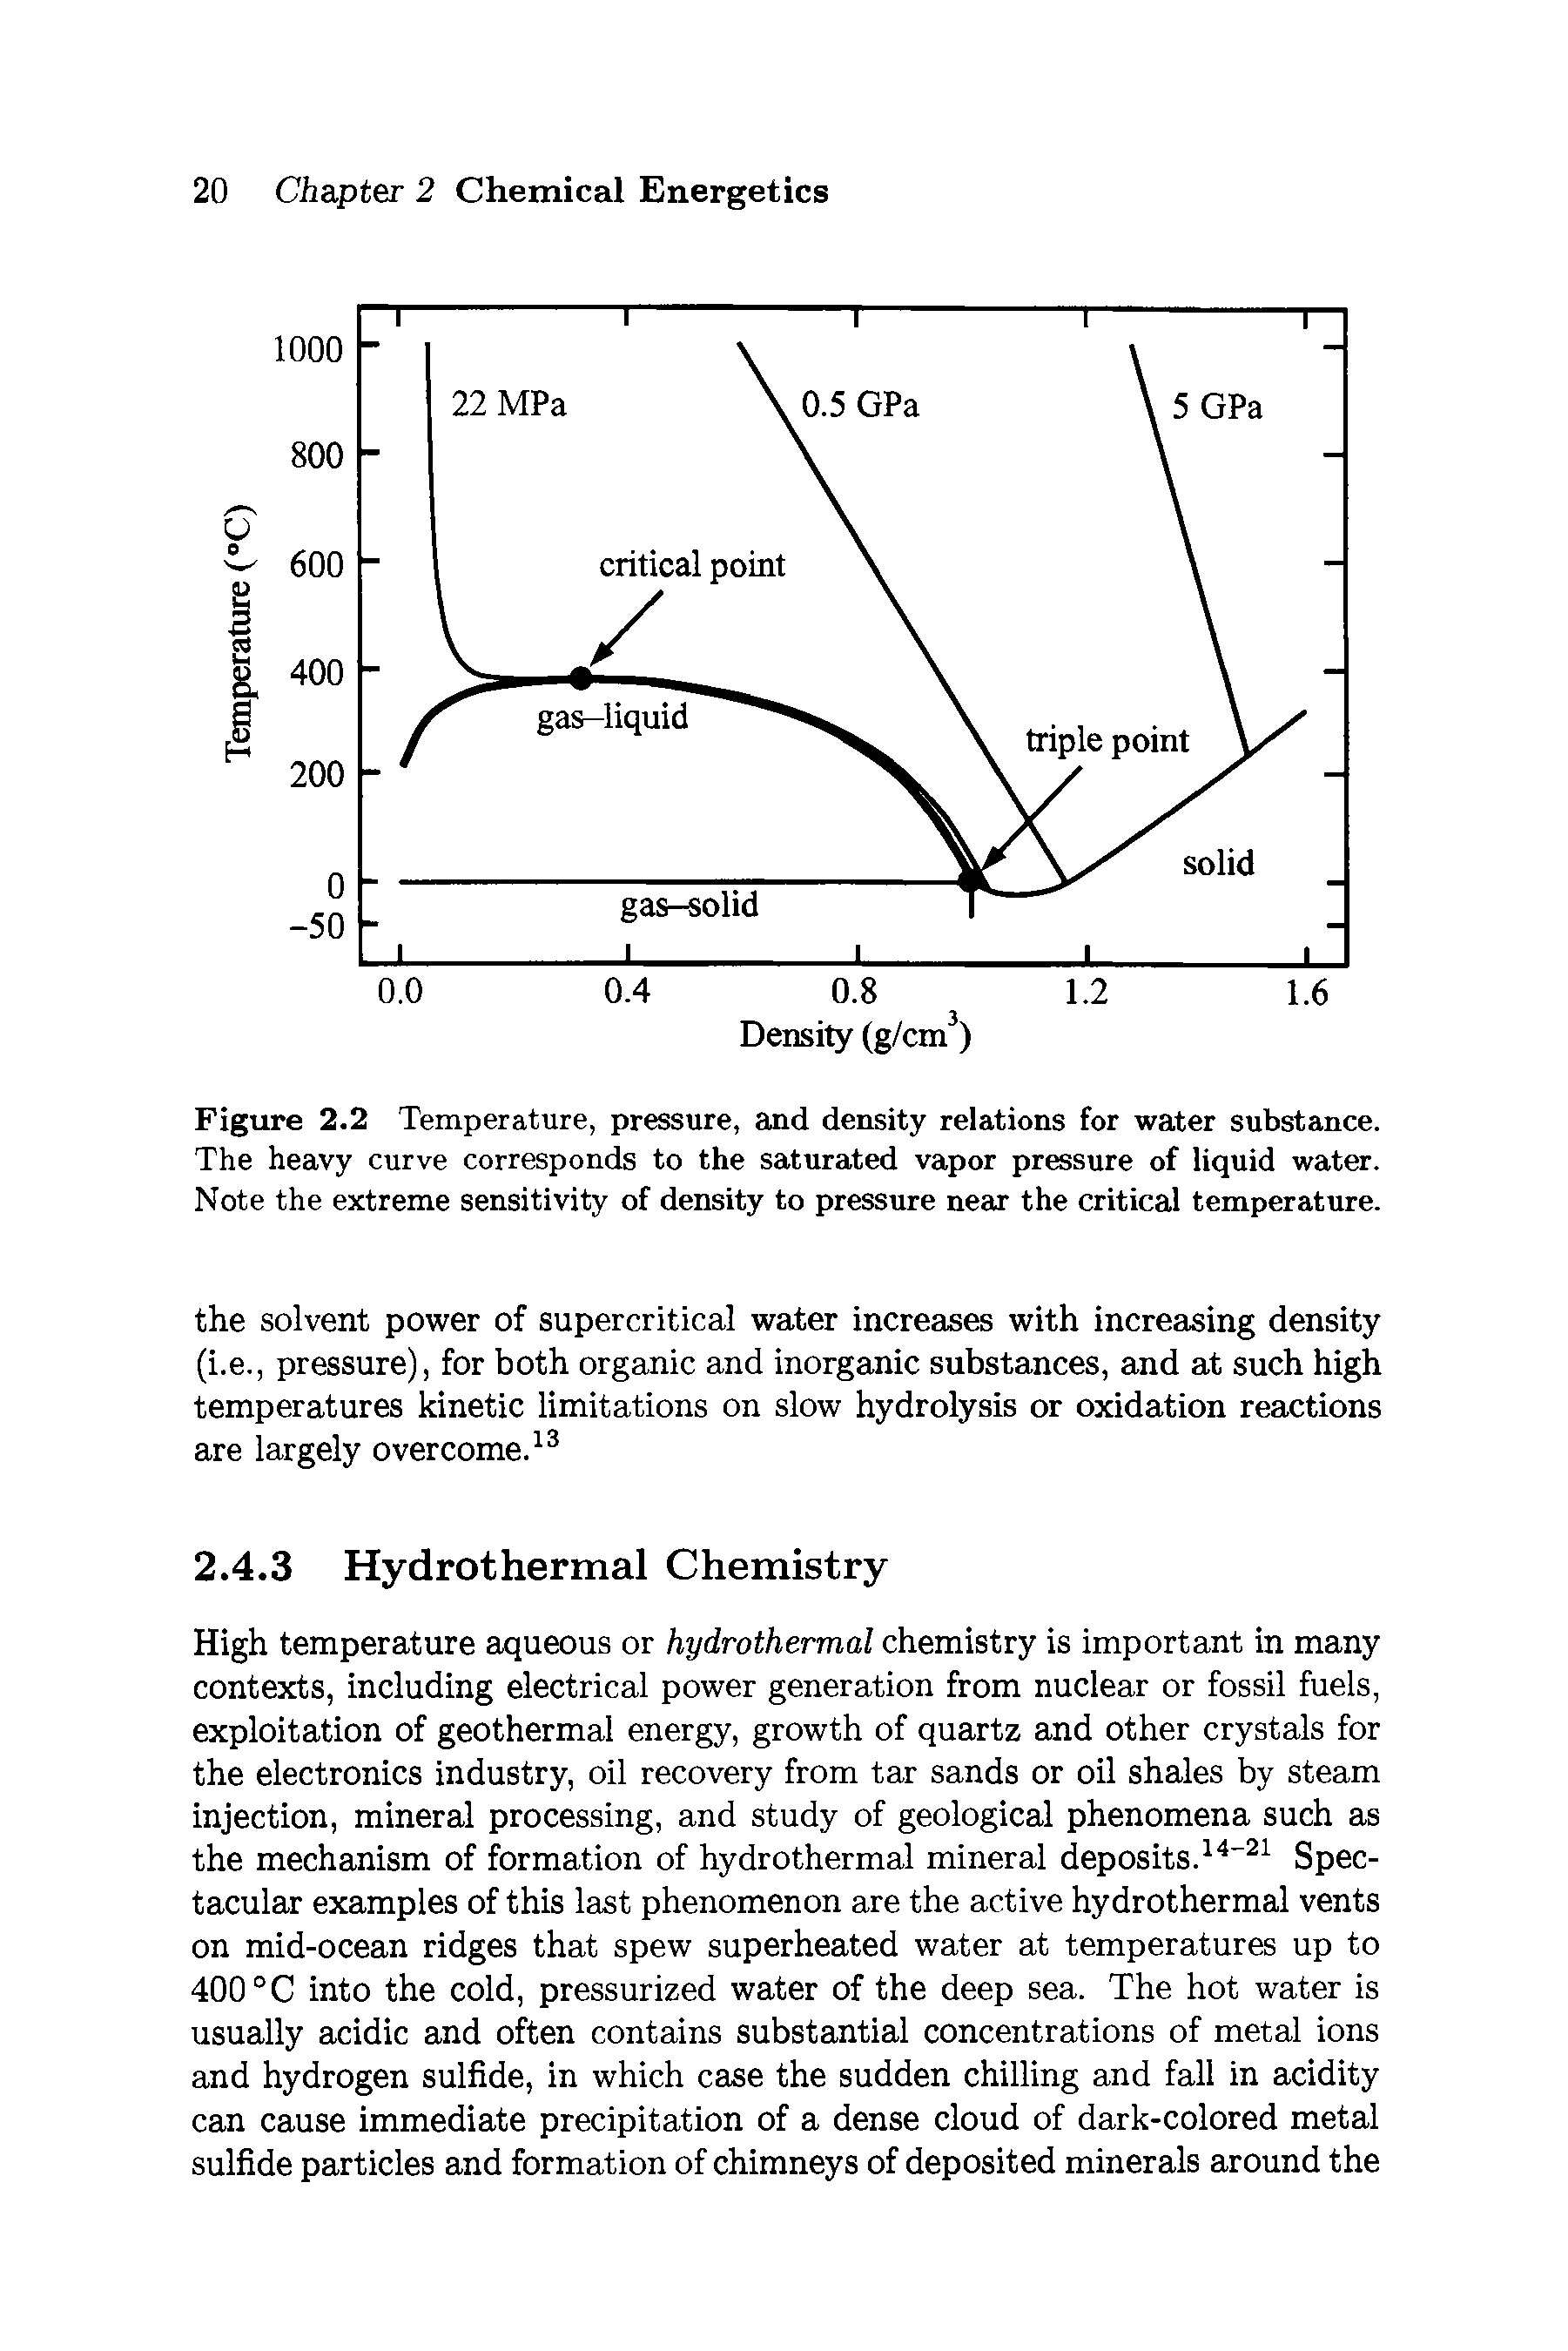 Figure 2.2 Temperature, pressure, and density relations for water substance. The heavy curve corresponds to the saturated vapor pressure of liquid water. Note the extreme sensitivity of density to pressure near the critical temperature.